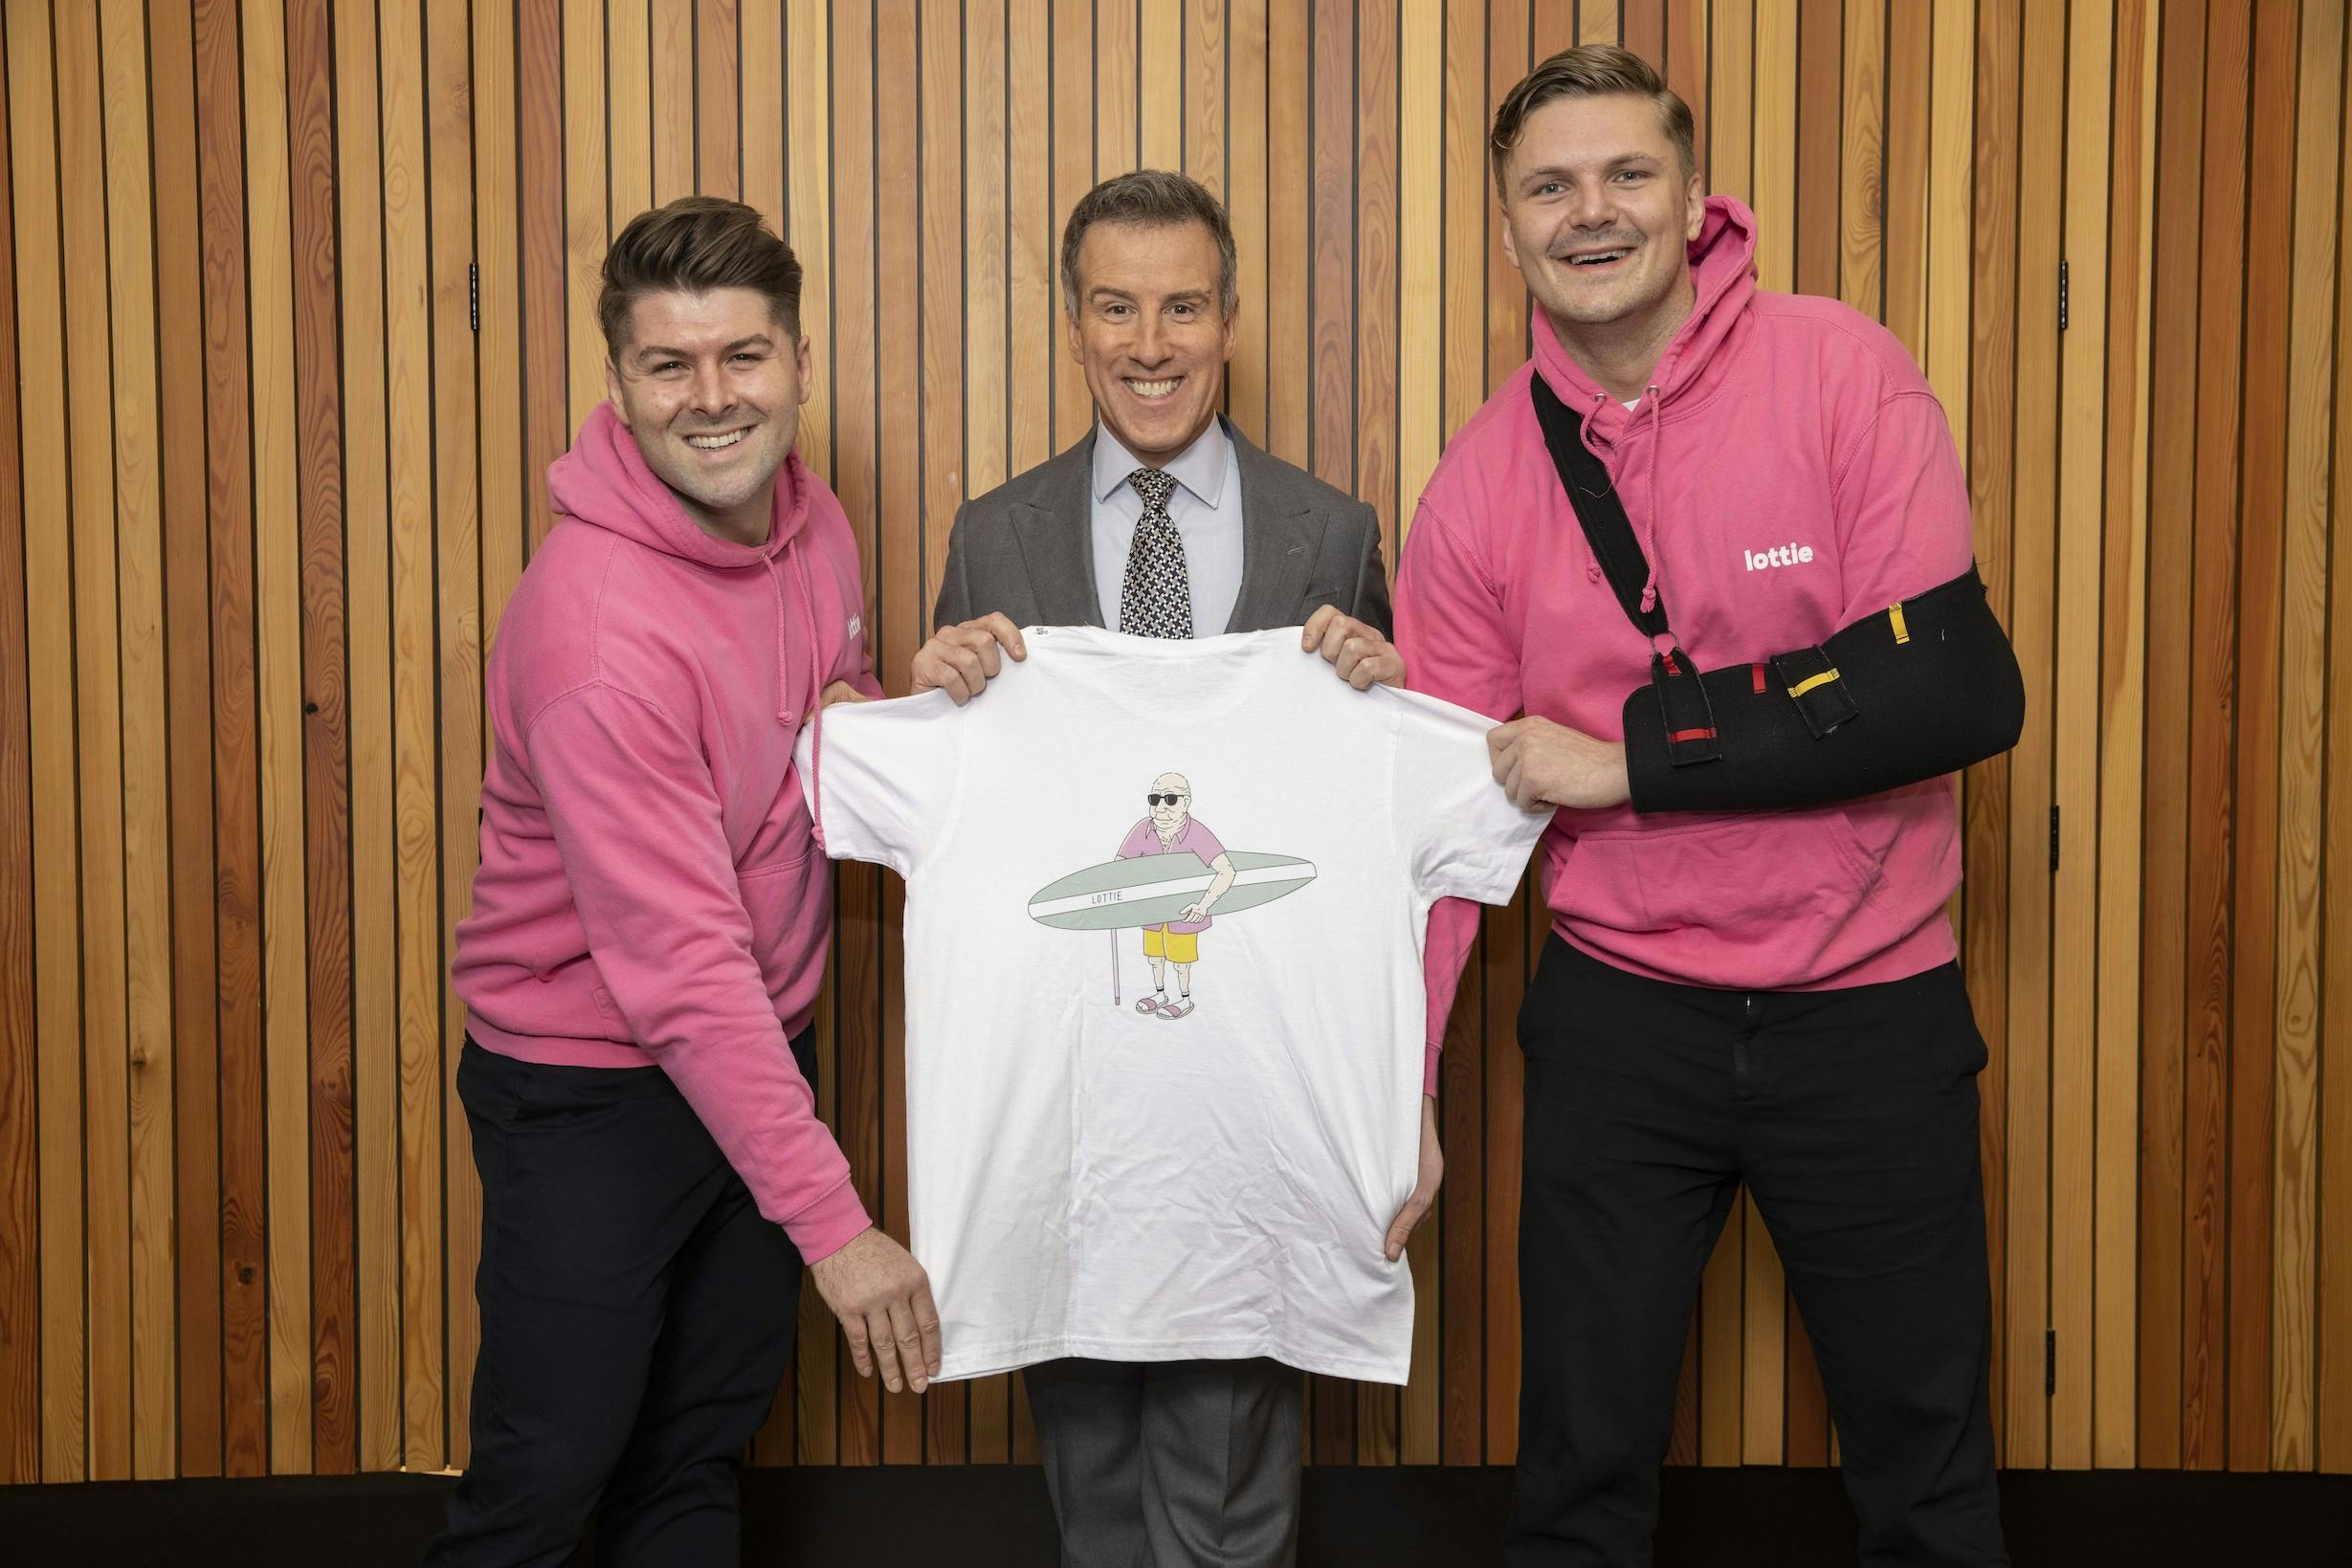 Chris Donnelly, Anton Du Beke and Will Donnelly of Lottie